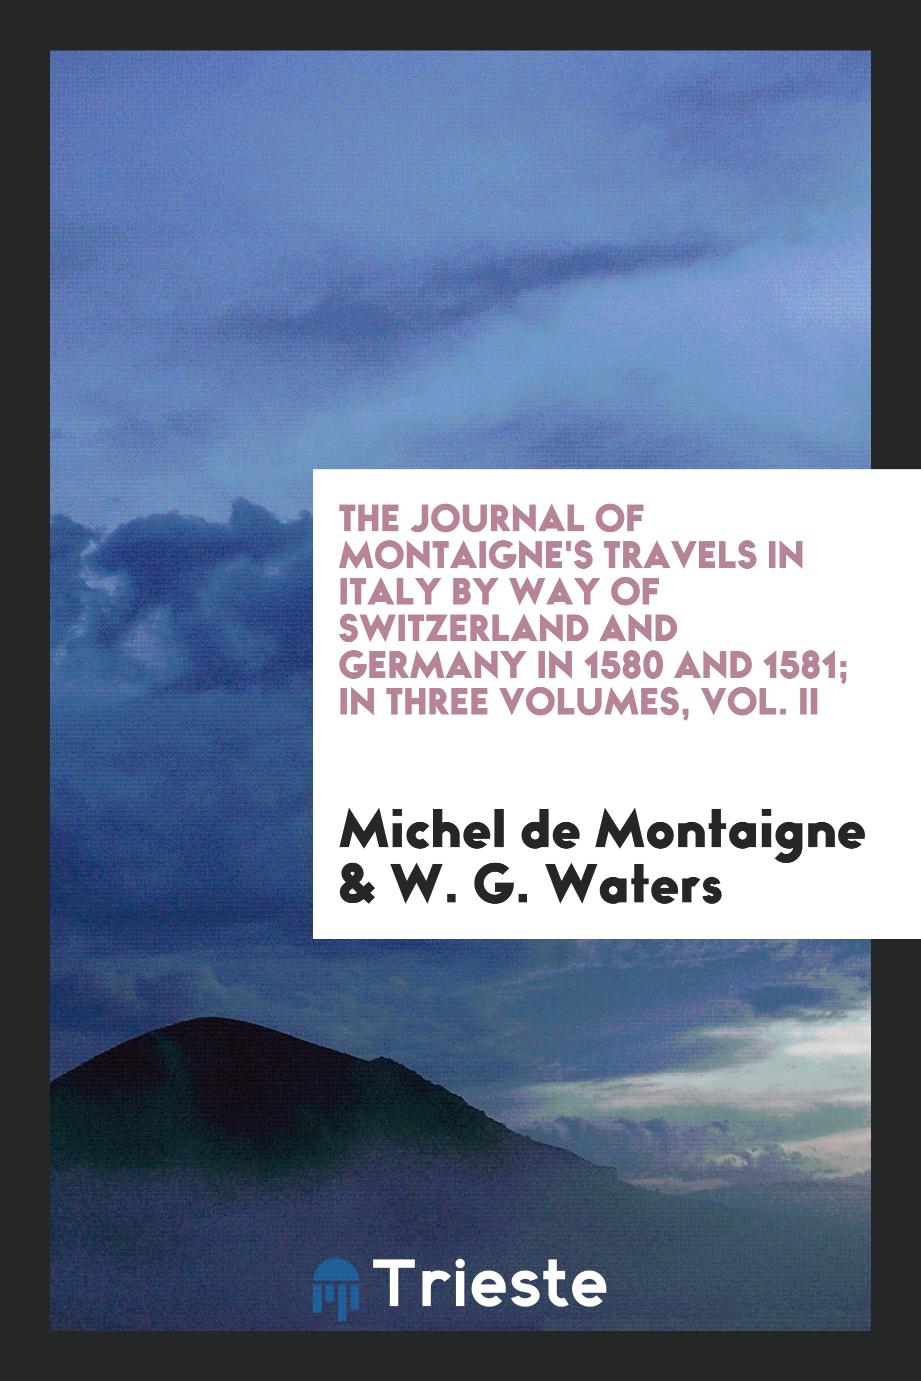 The journal of Montaigne's travels in Italy by way of Switzerland and Germany in 1580 and 1581; In Three Volumes, Vol. II